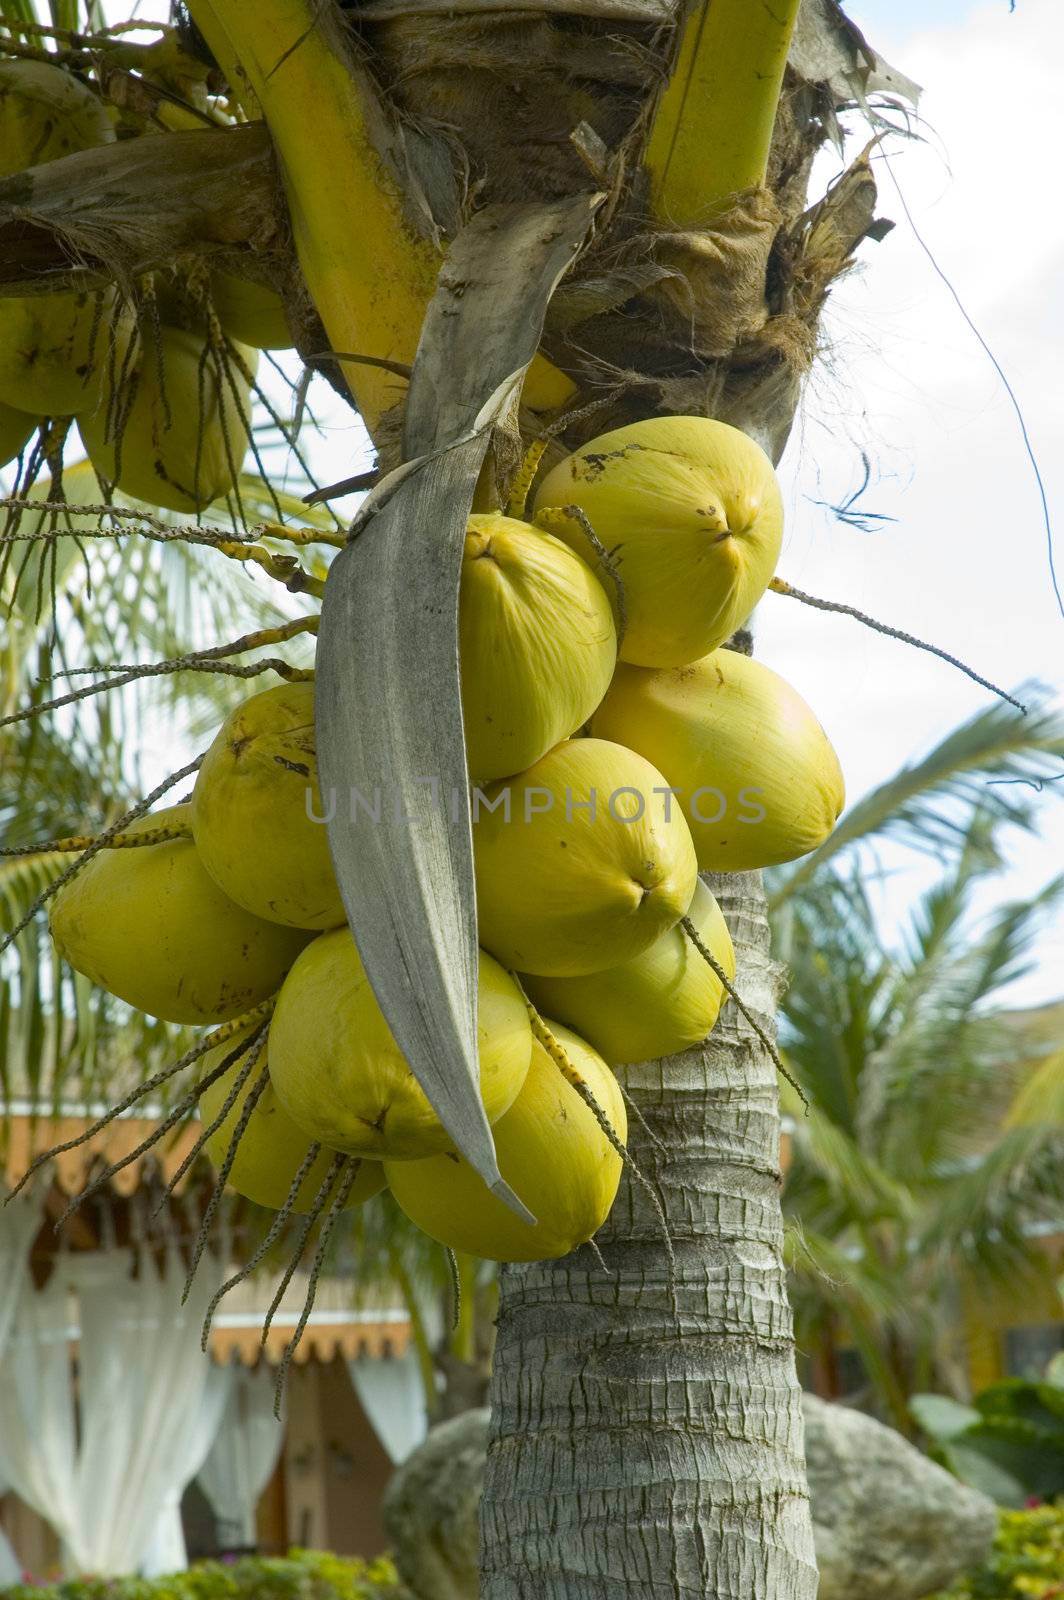 A bunch of coconuts growing an a palm tree